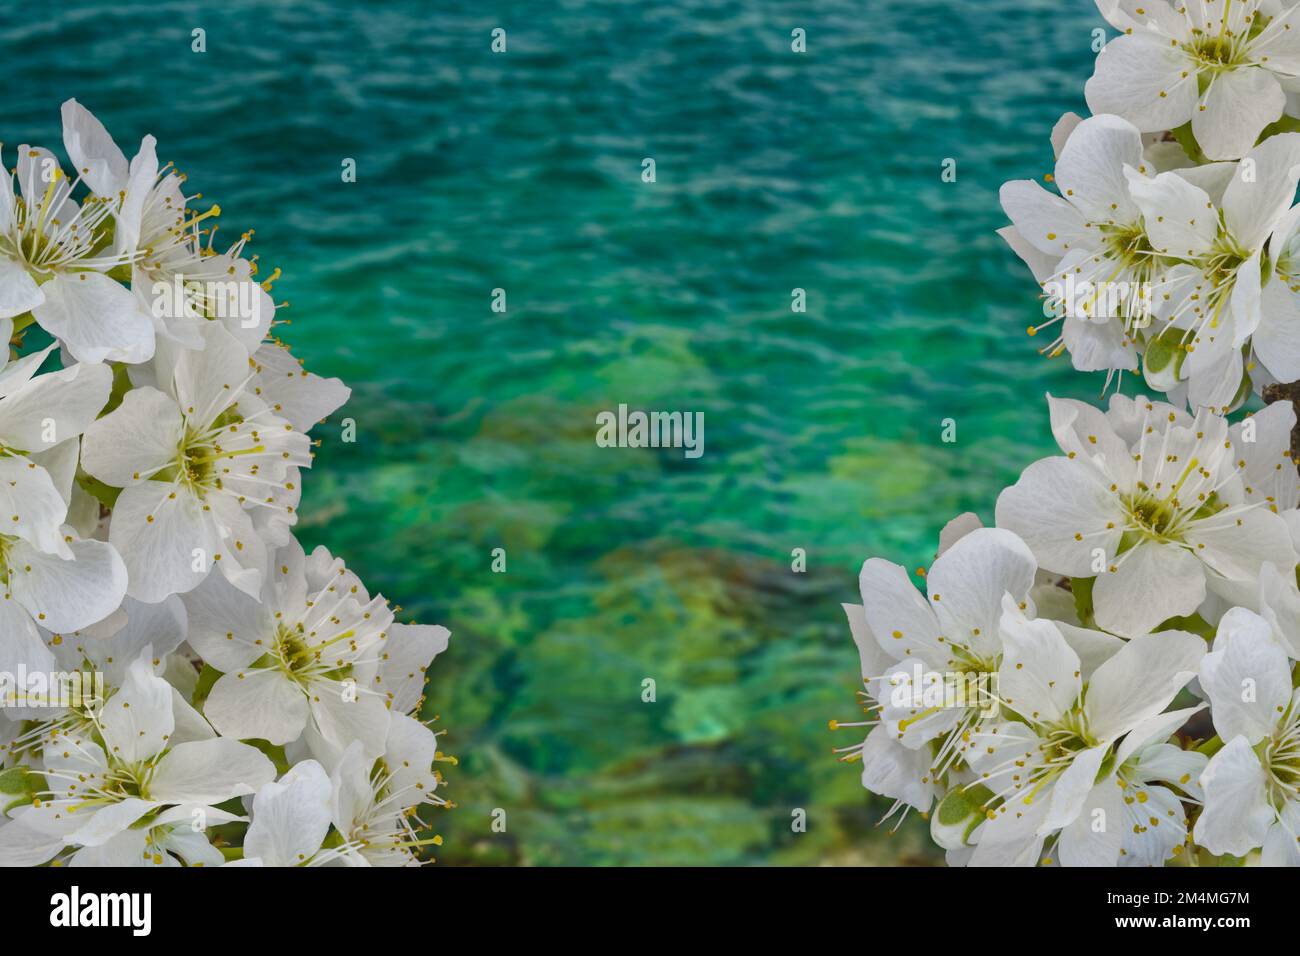 White apple blossoms, blurred blue green sea background. Floral banner frame Stock Photo